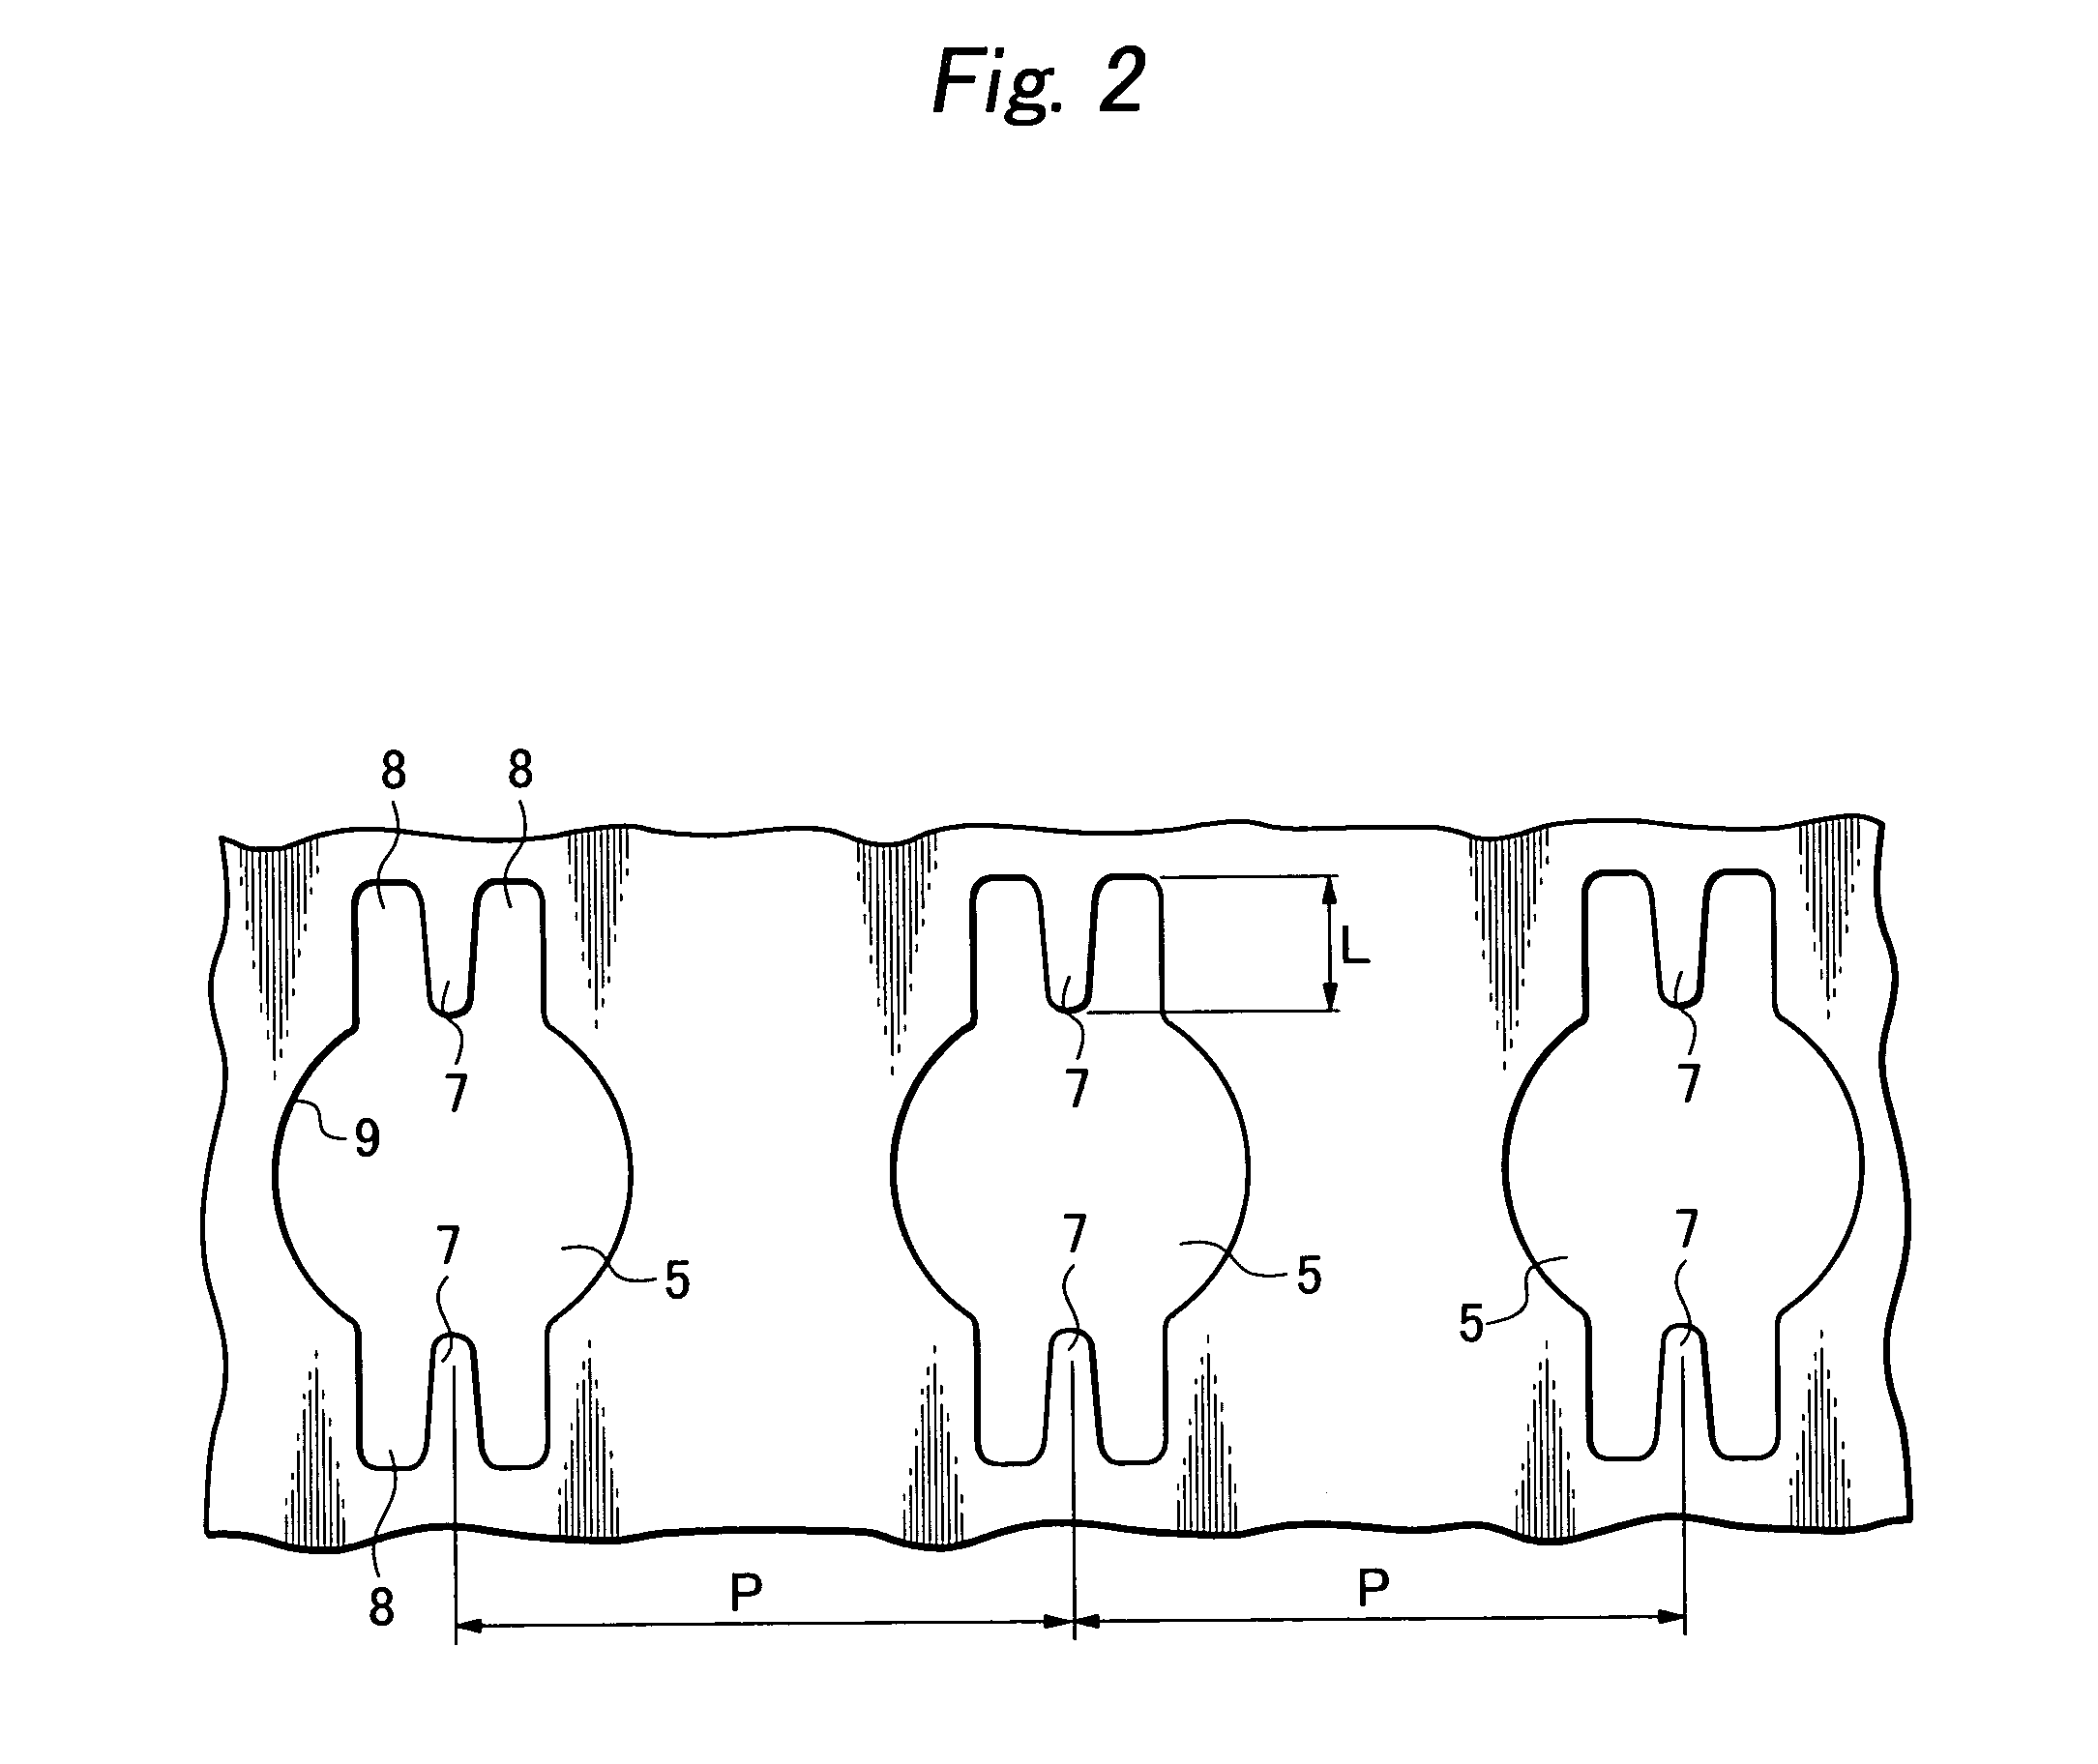 Ground metal fitting and ground structure for jacks of electronic devices